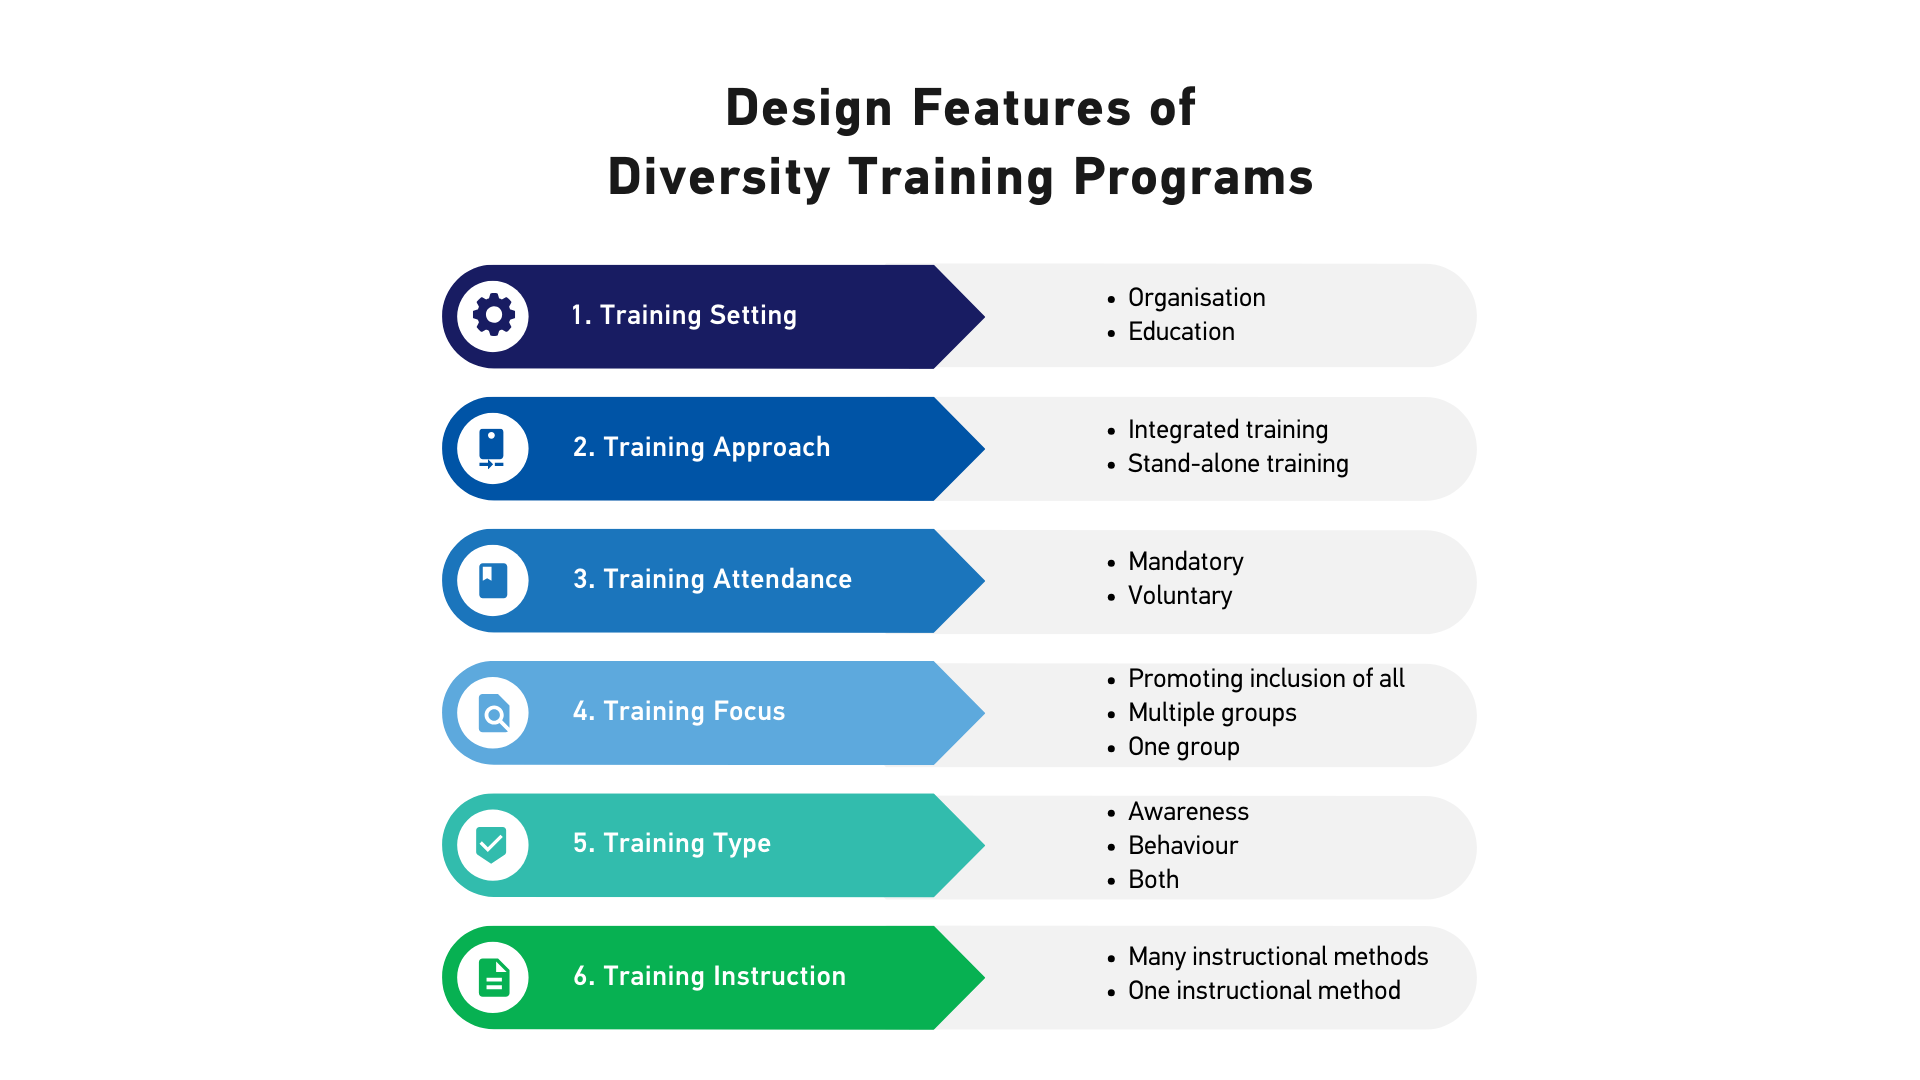 Illustration showing the design features of diversity training programs